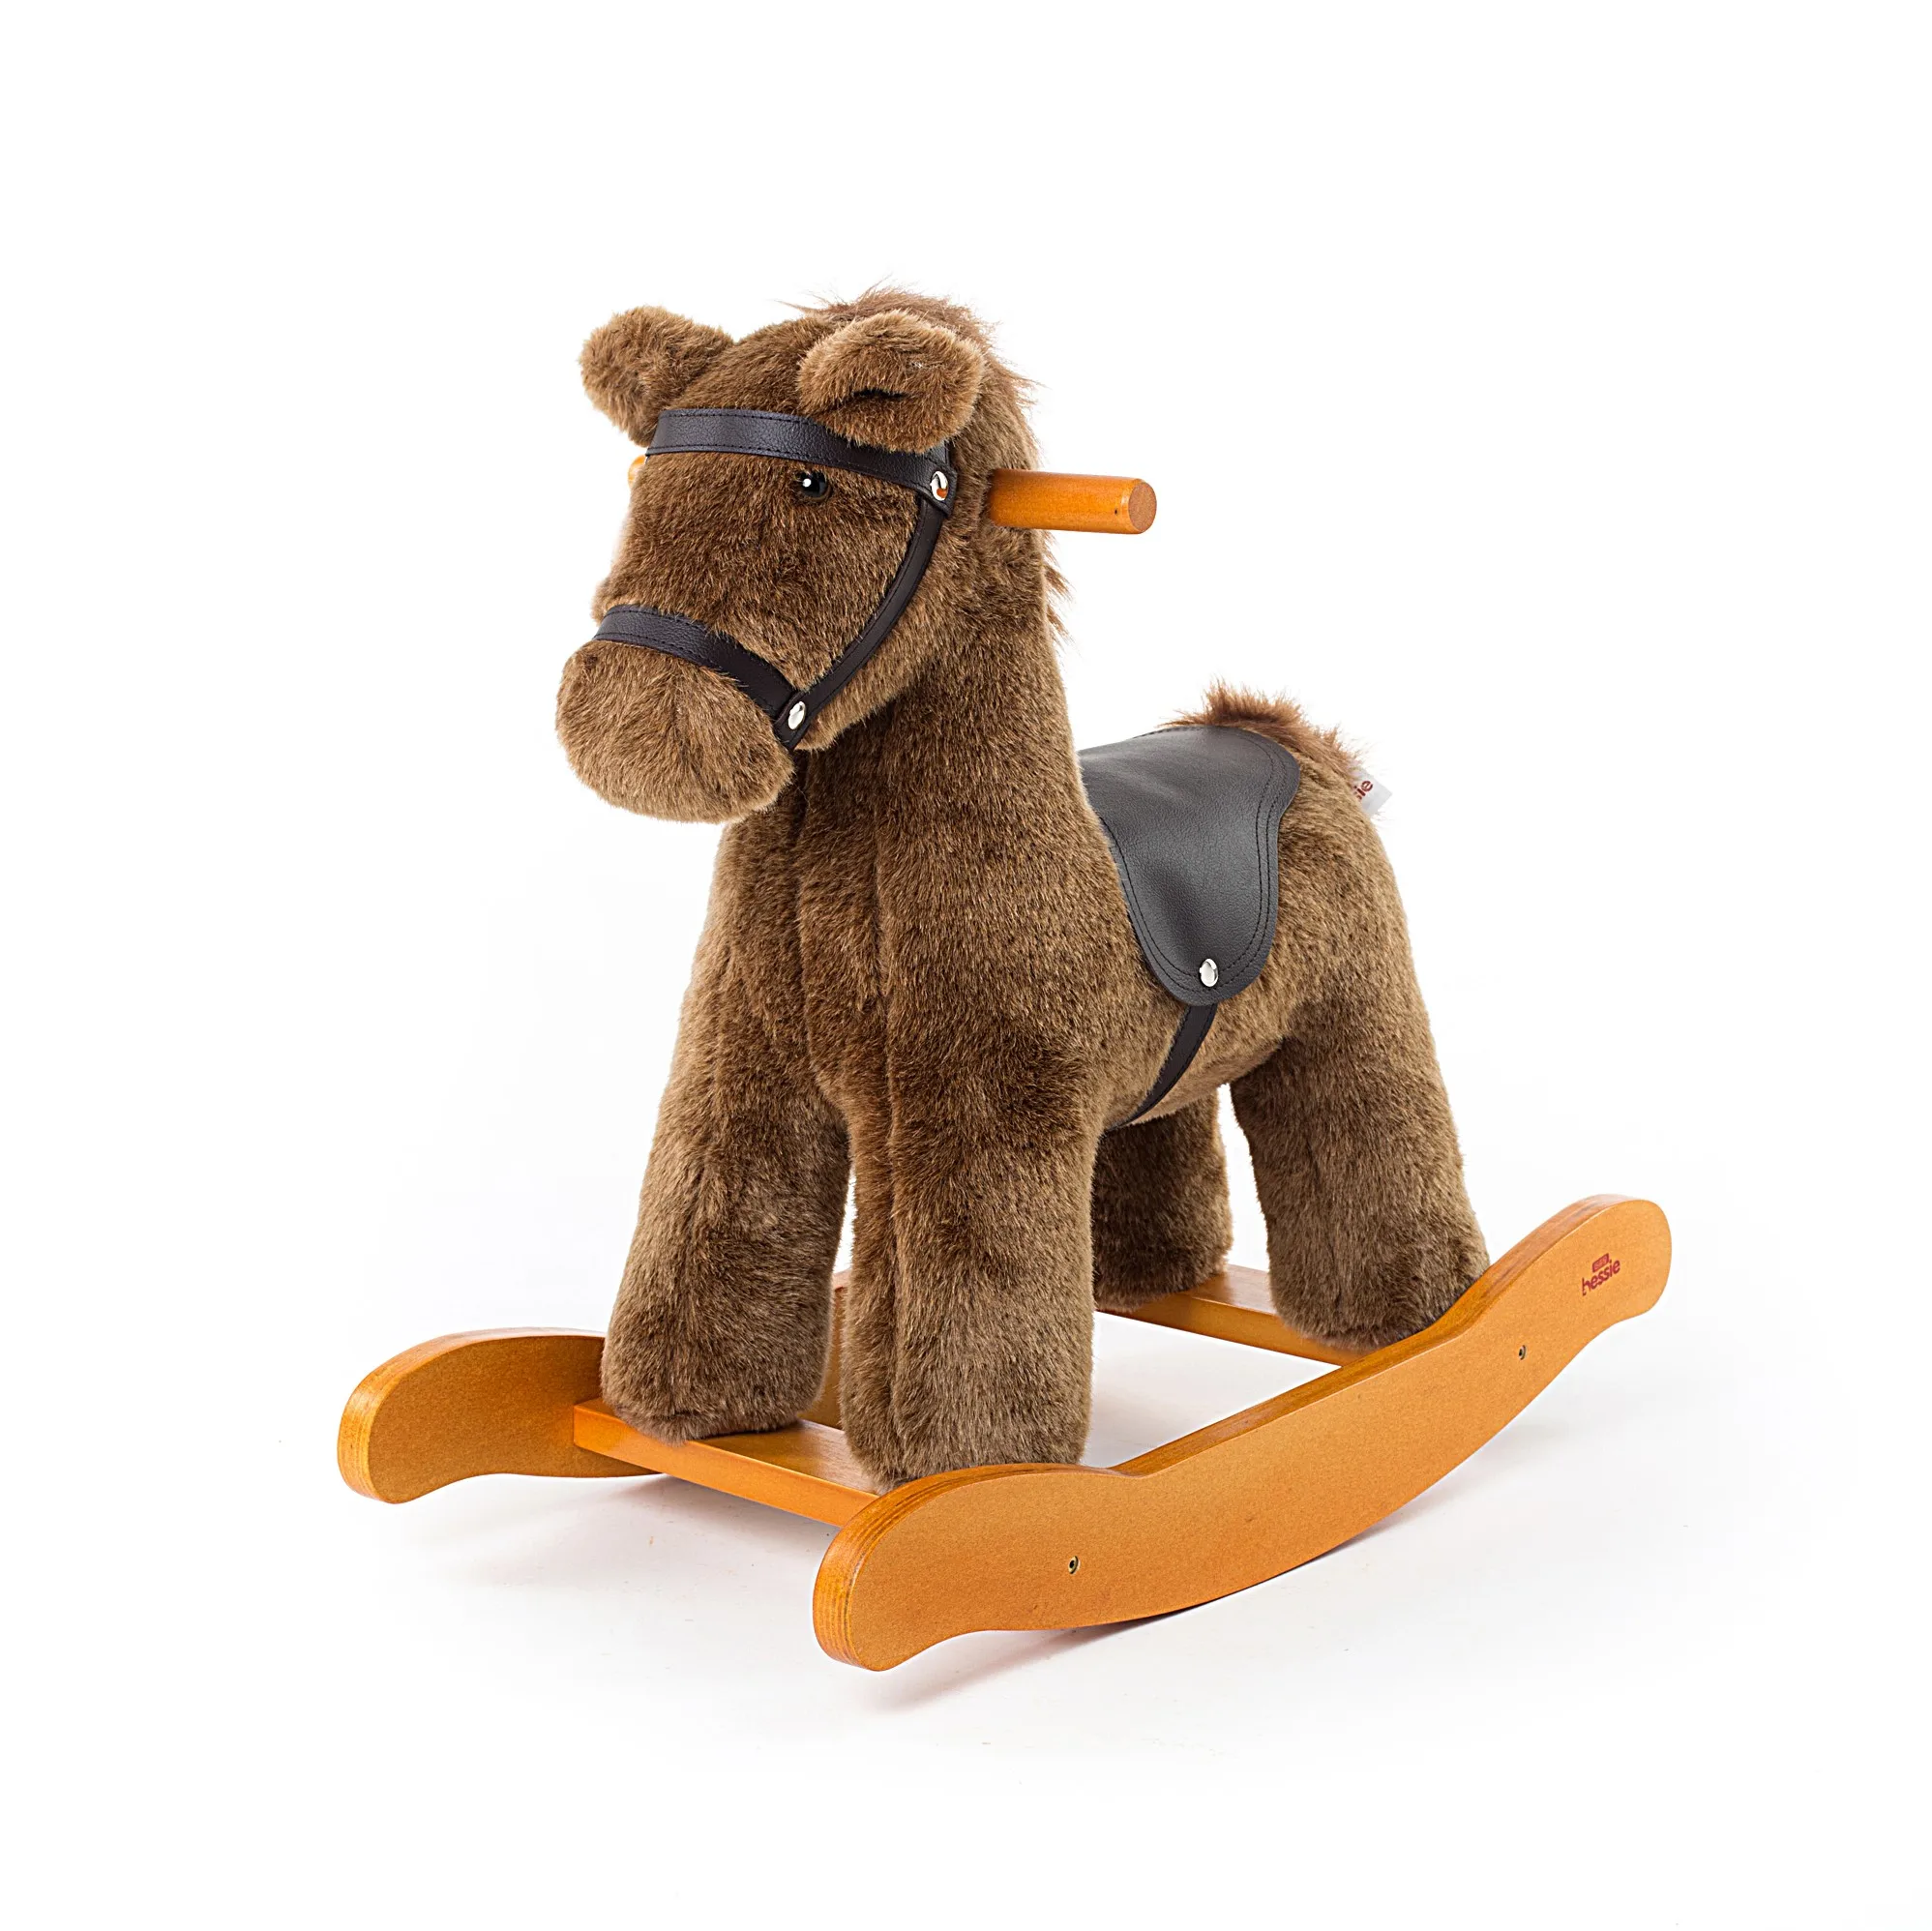 Holiday gift Velour wooden Animal plush wing toys  England Knight brown pony rocking horse with stock